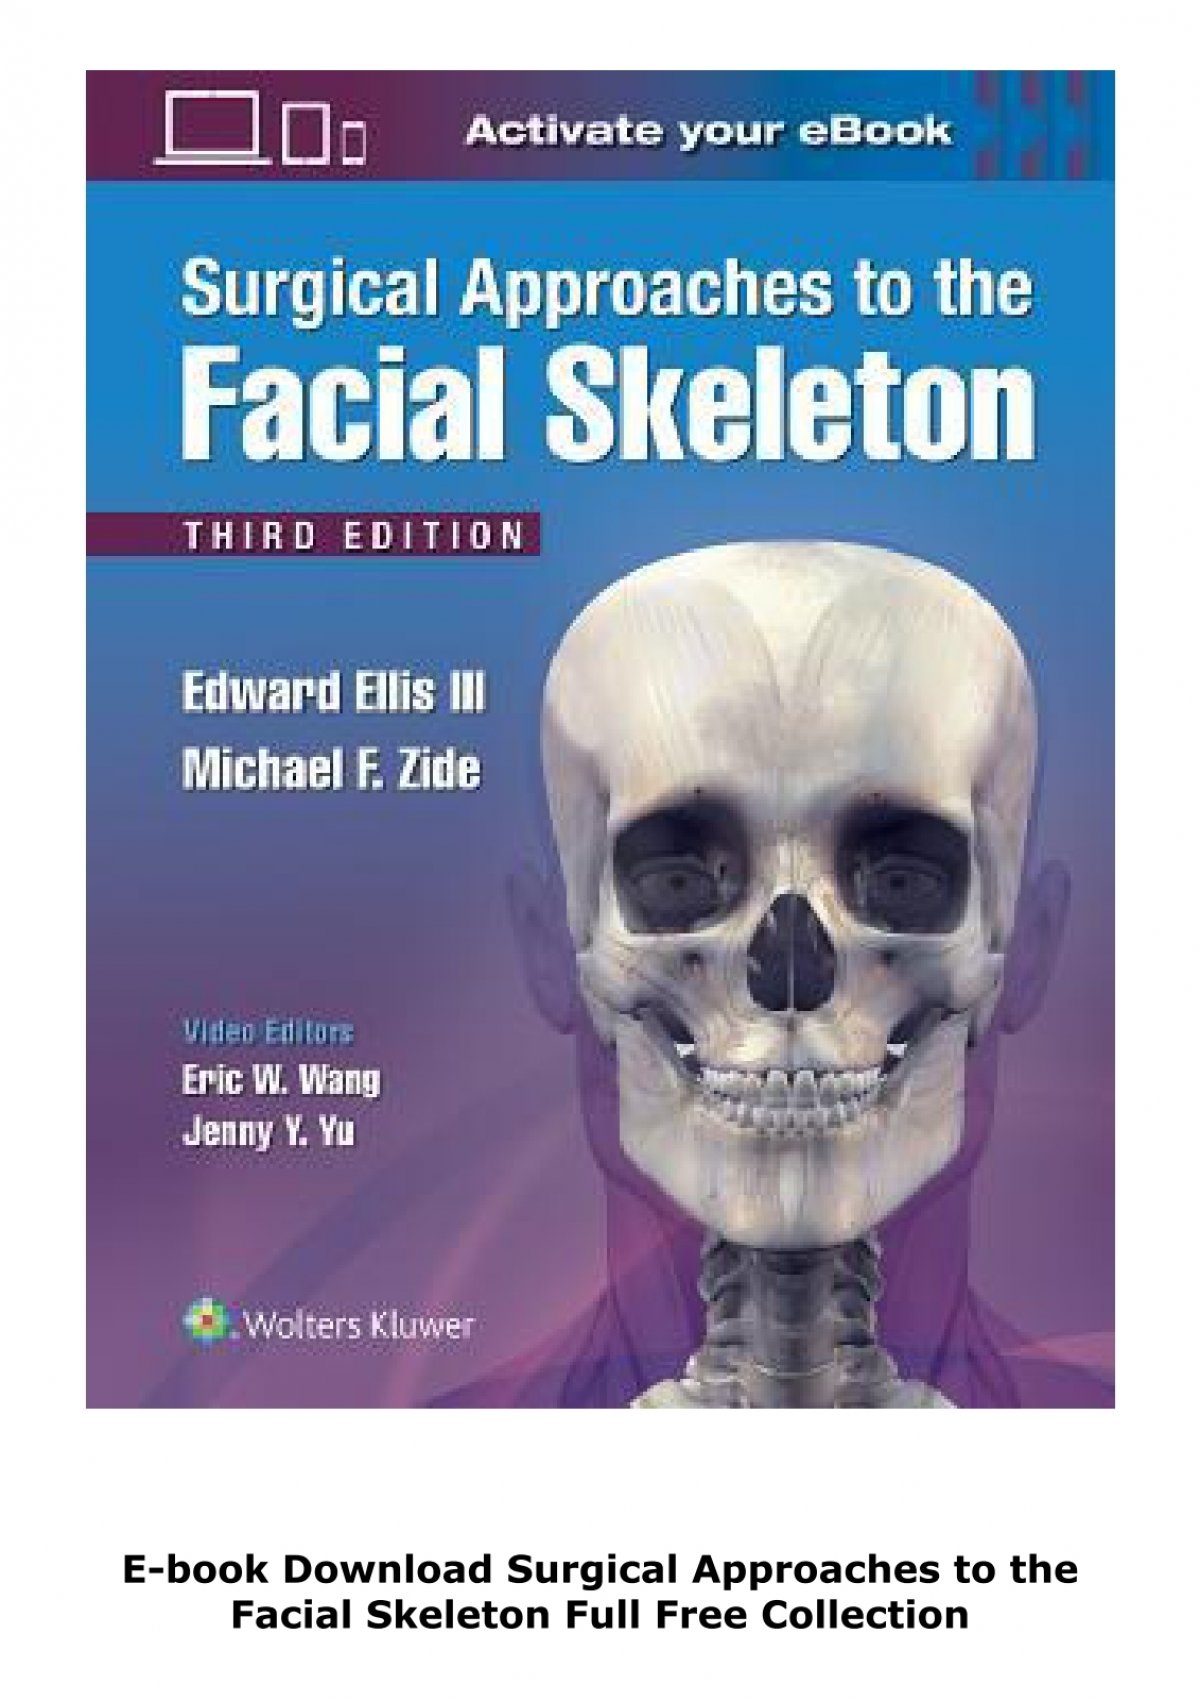 E-book Download Surgical Approaches to the Facial Skeleton Full 